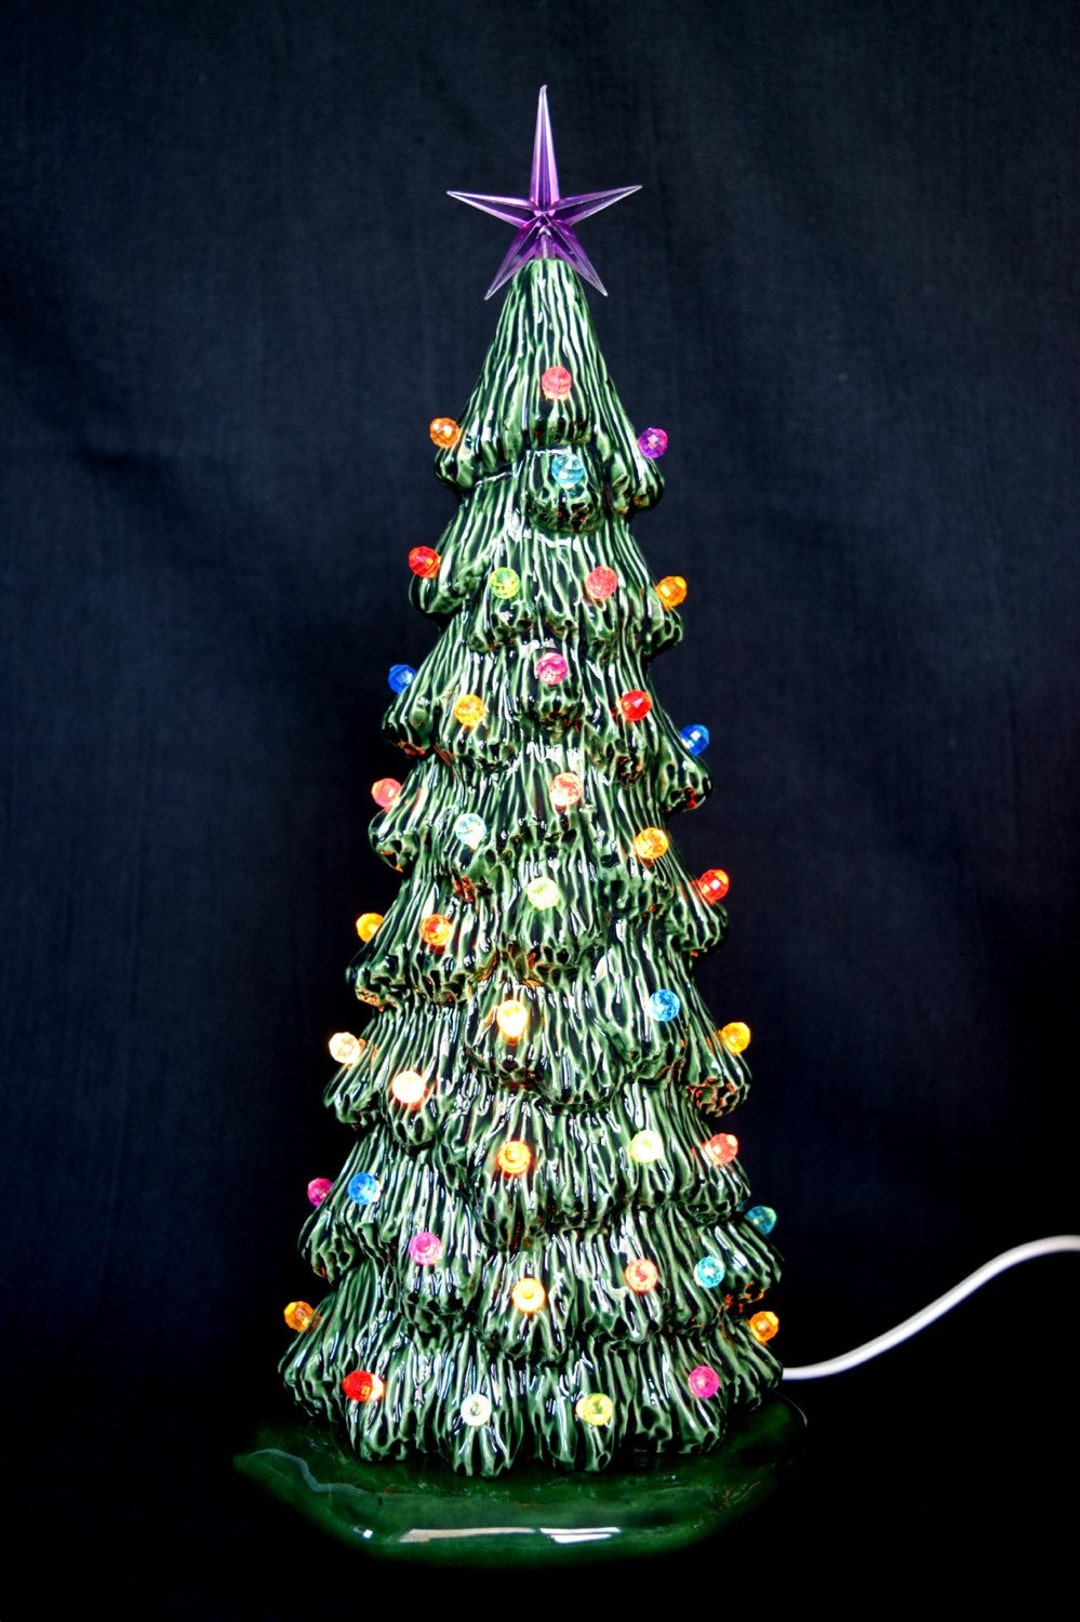 Lighted Ceramic Christmas Tree - Electric with Multi-Colored Lights - 16 inch